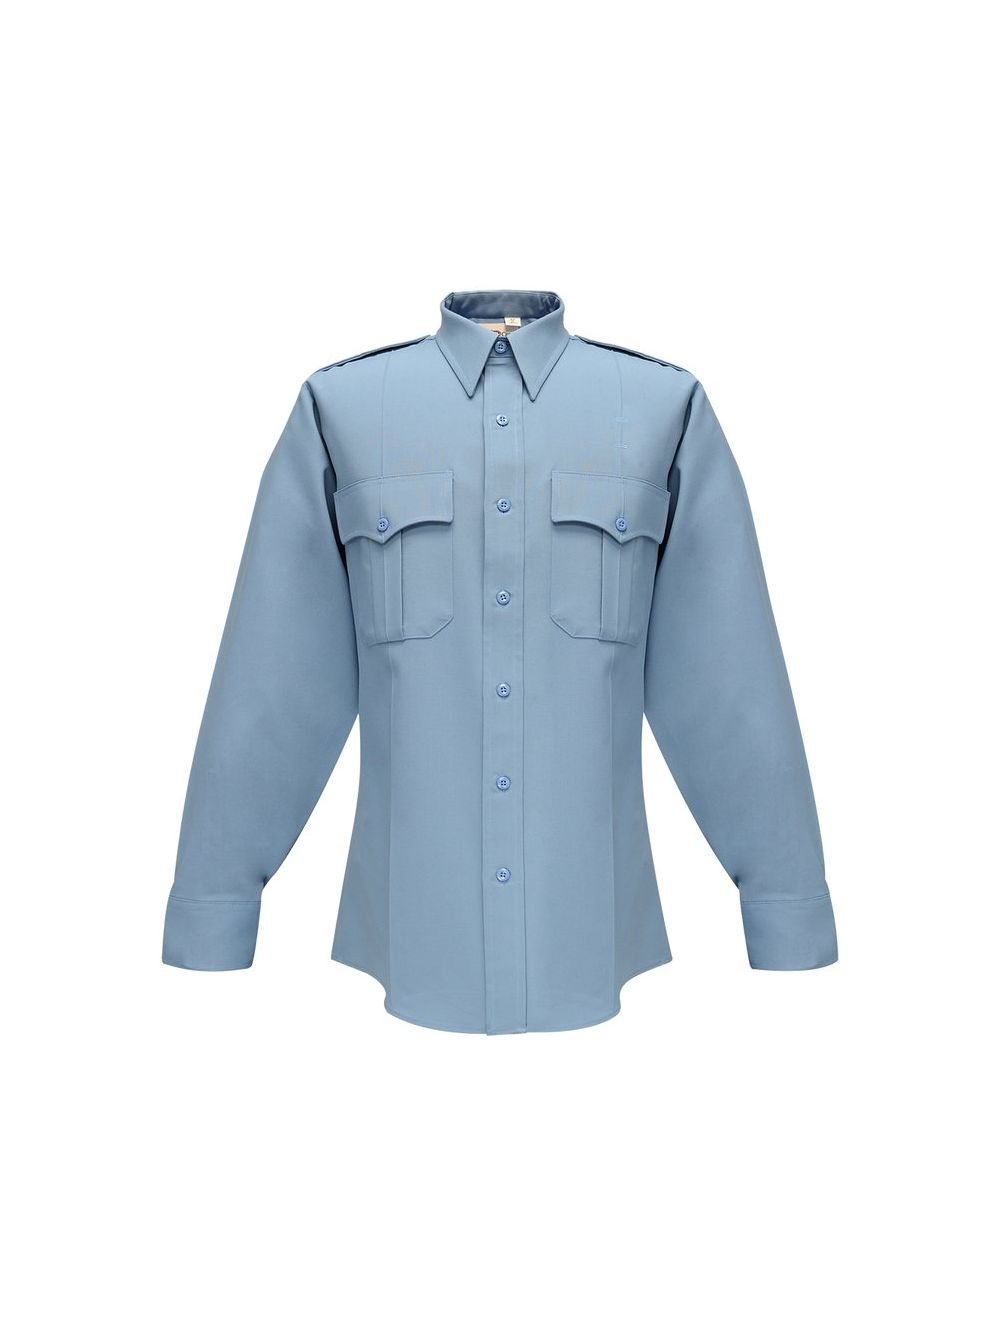 Flying Cross Command Long Sleeve Shirt with Zipper & Convertible Sport Collar - Newest Products